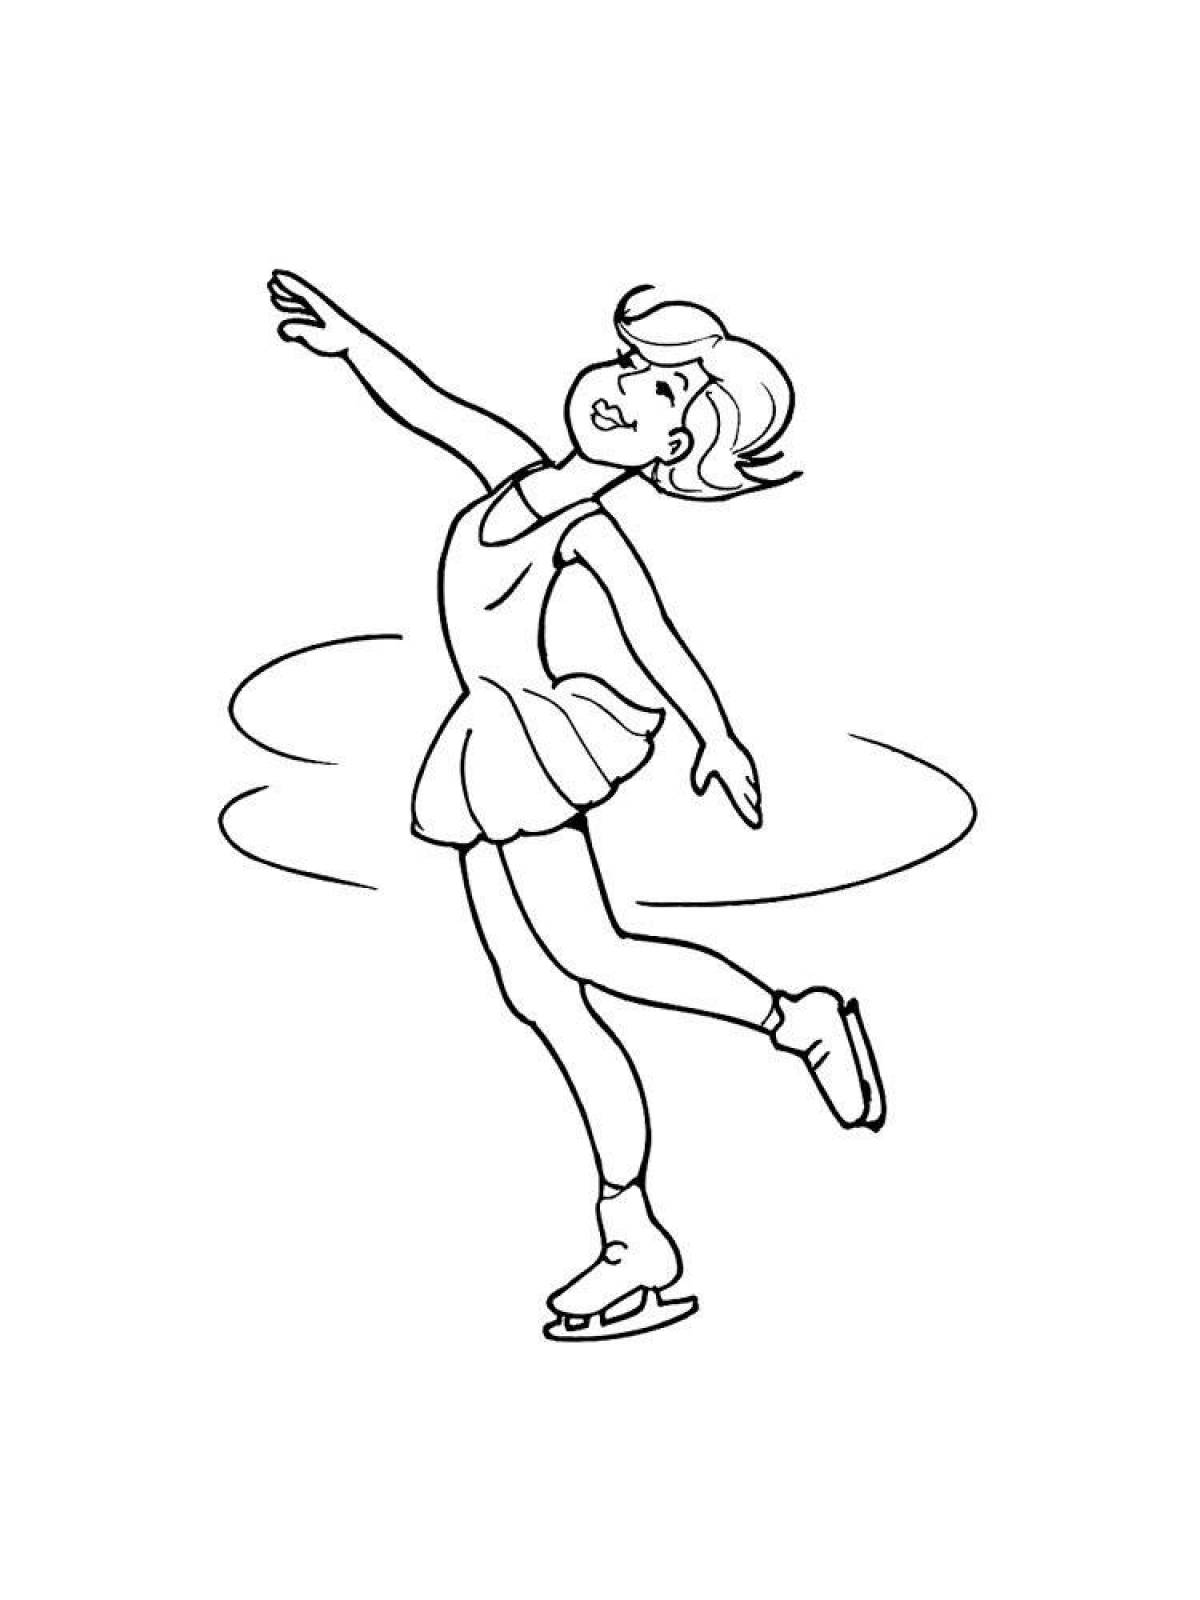 Tempting figure skating coloring page